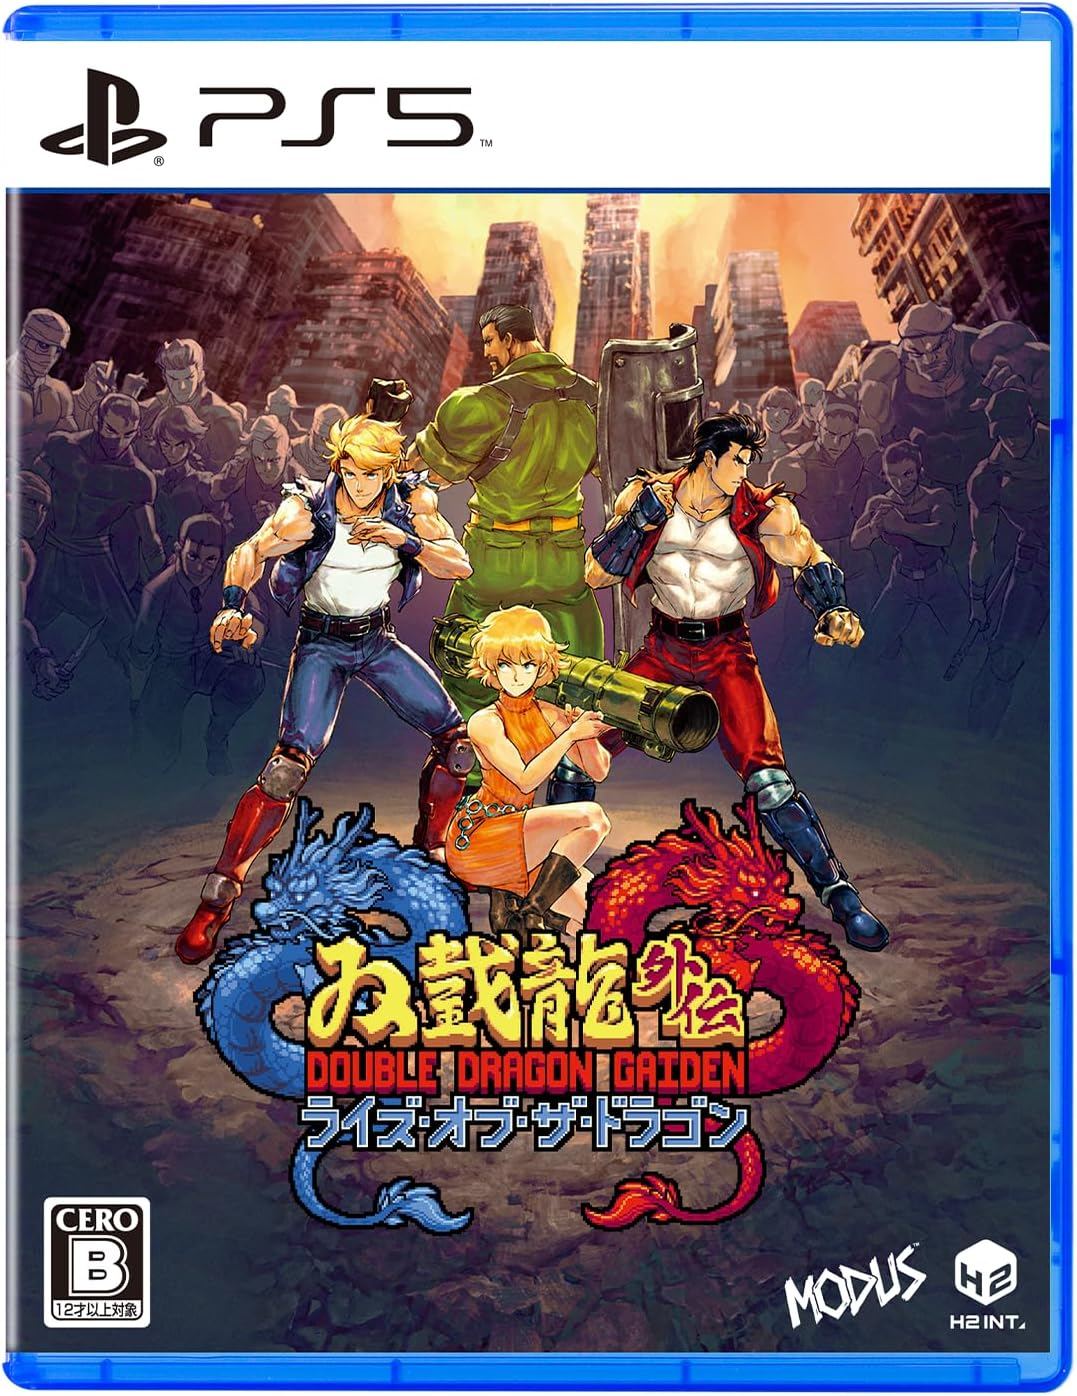 Double Dragon Gaiden: Rise of the Dragons for Nintendo Switch - Nintendo  Official Site